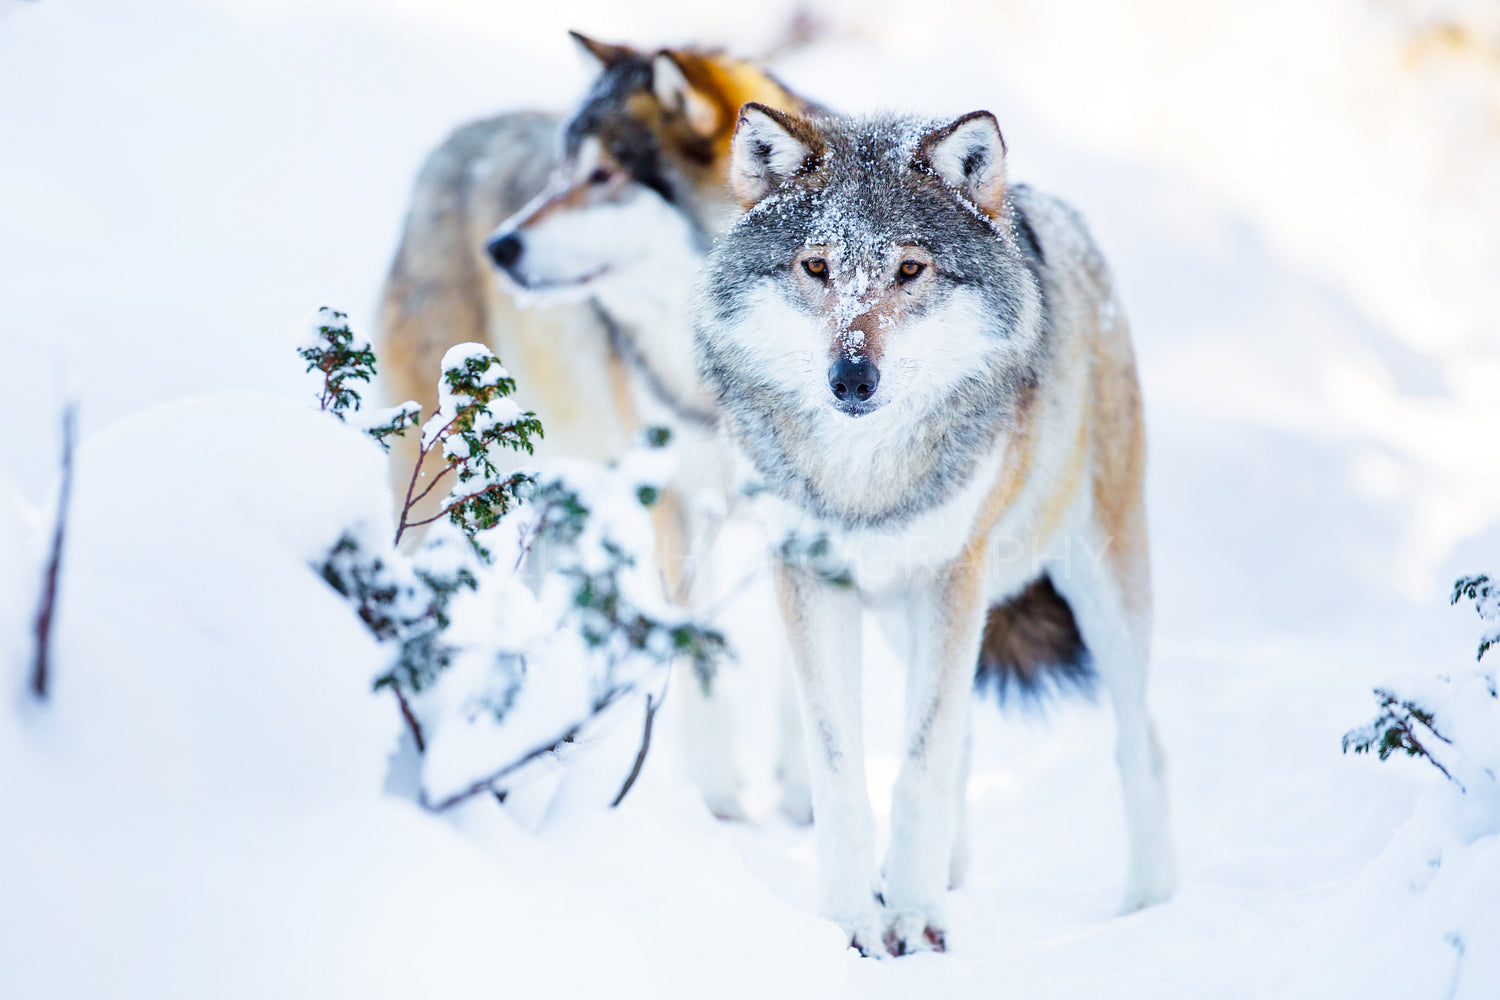 Two large wolves in cold winter landscape